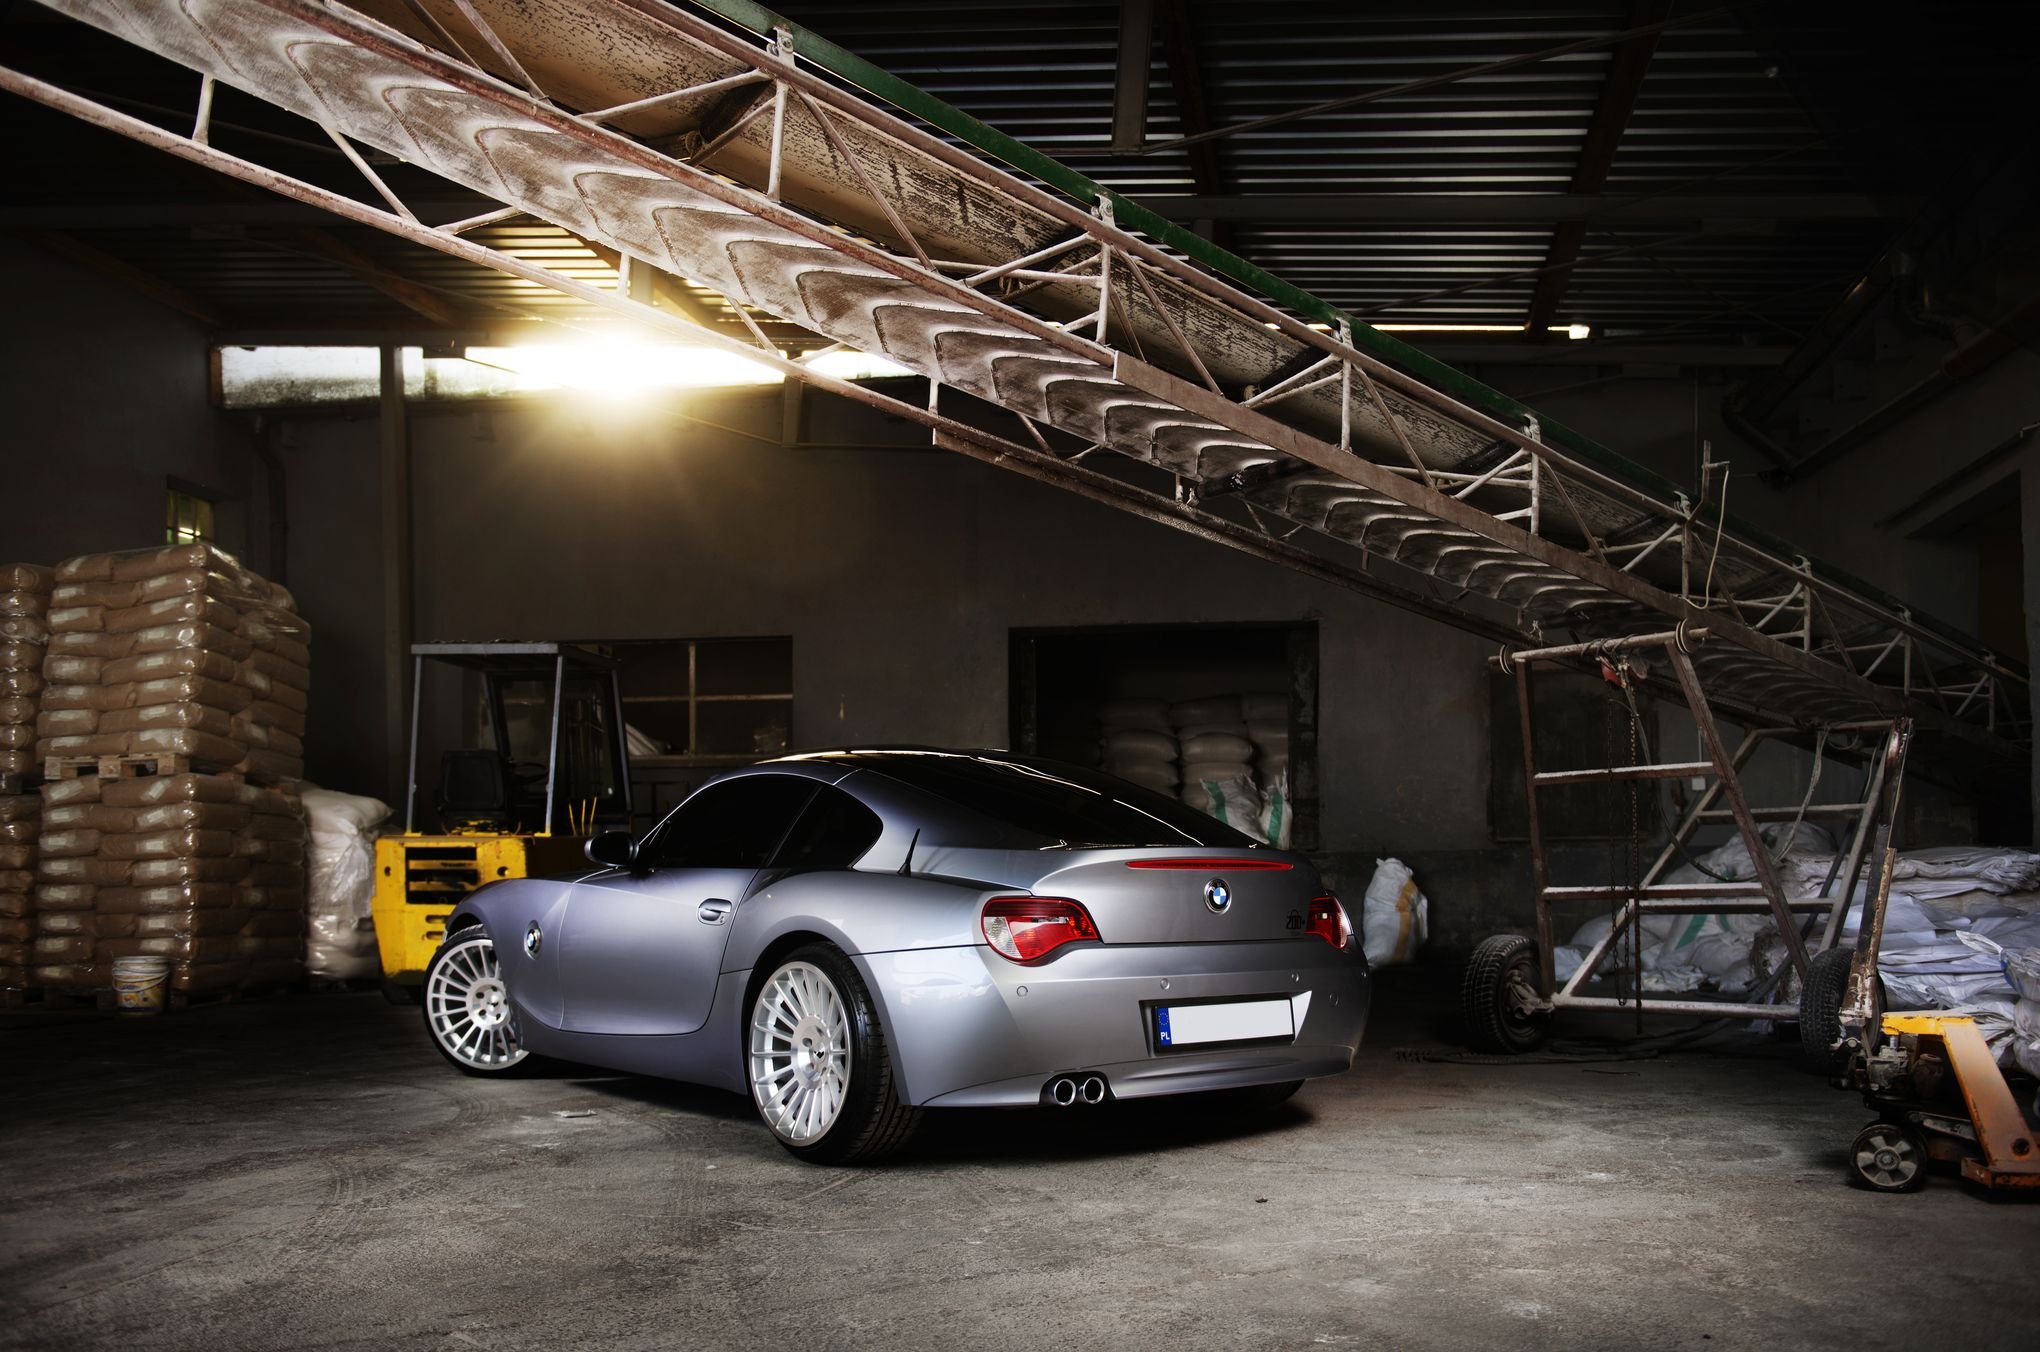 Aftermarket Rear Diffuser on Gray BMW Z4 - Photo by JR Wheels